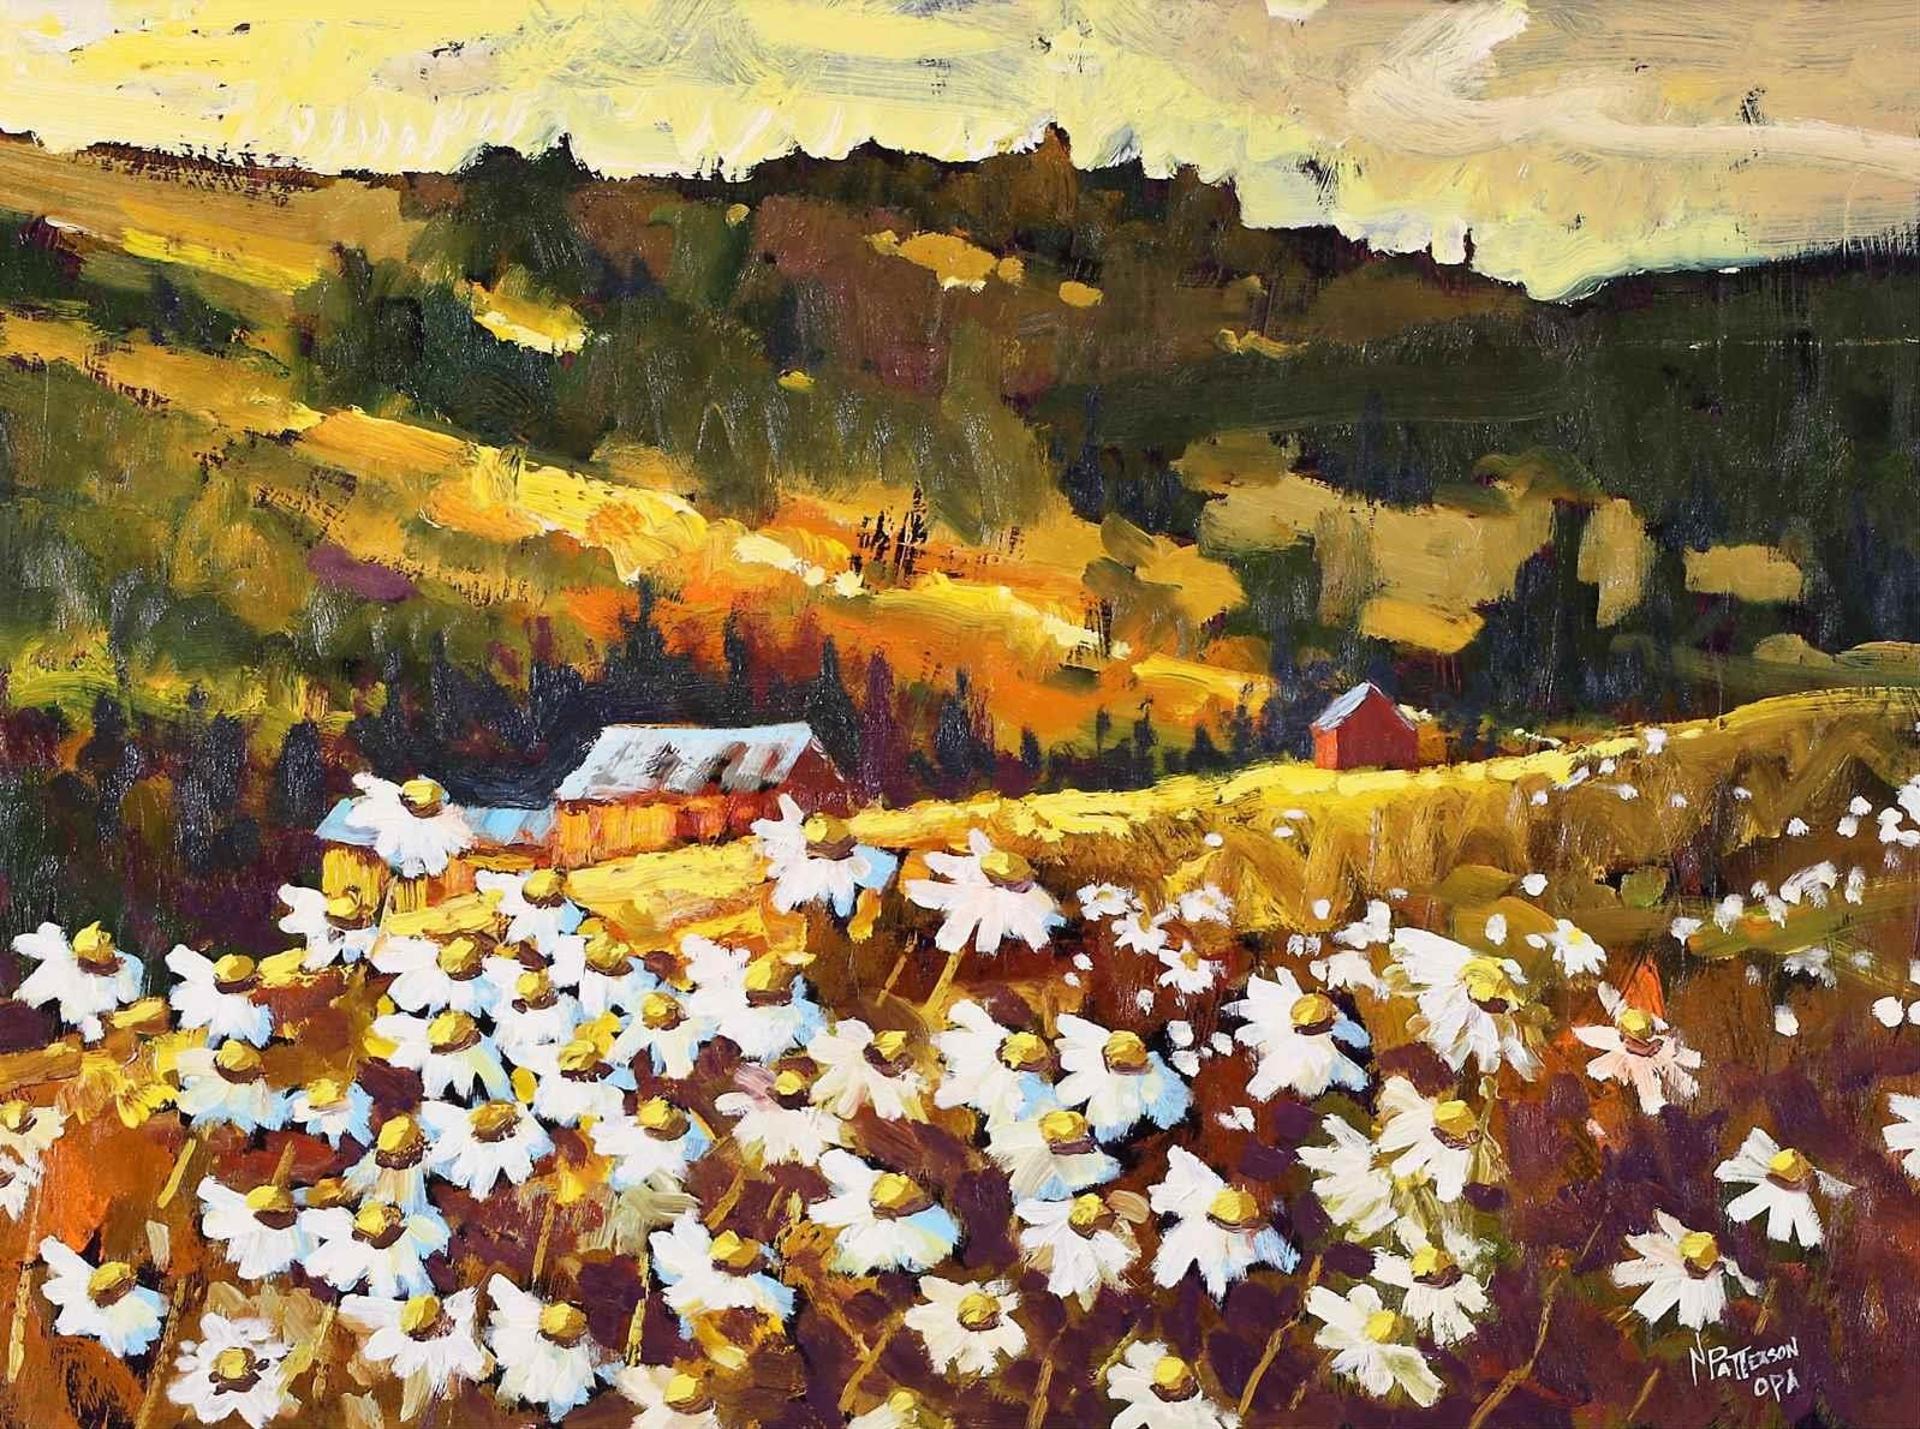 Neil Patterson (1947) - Daisies On The Hill